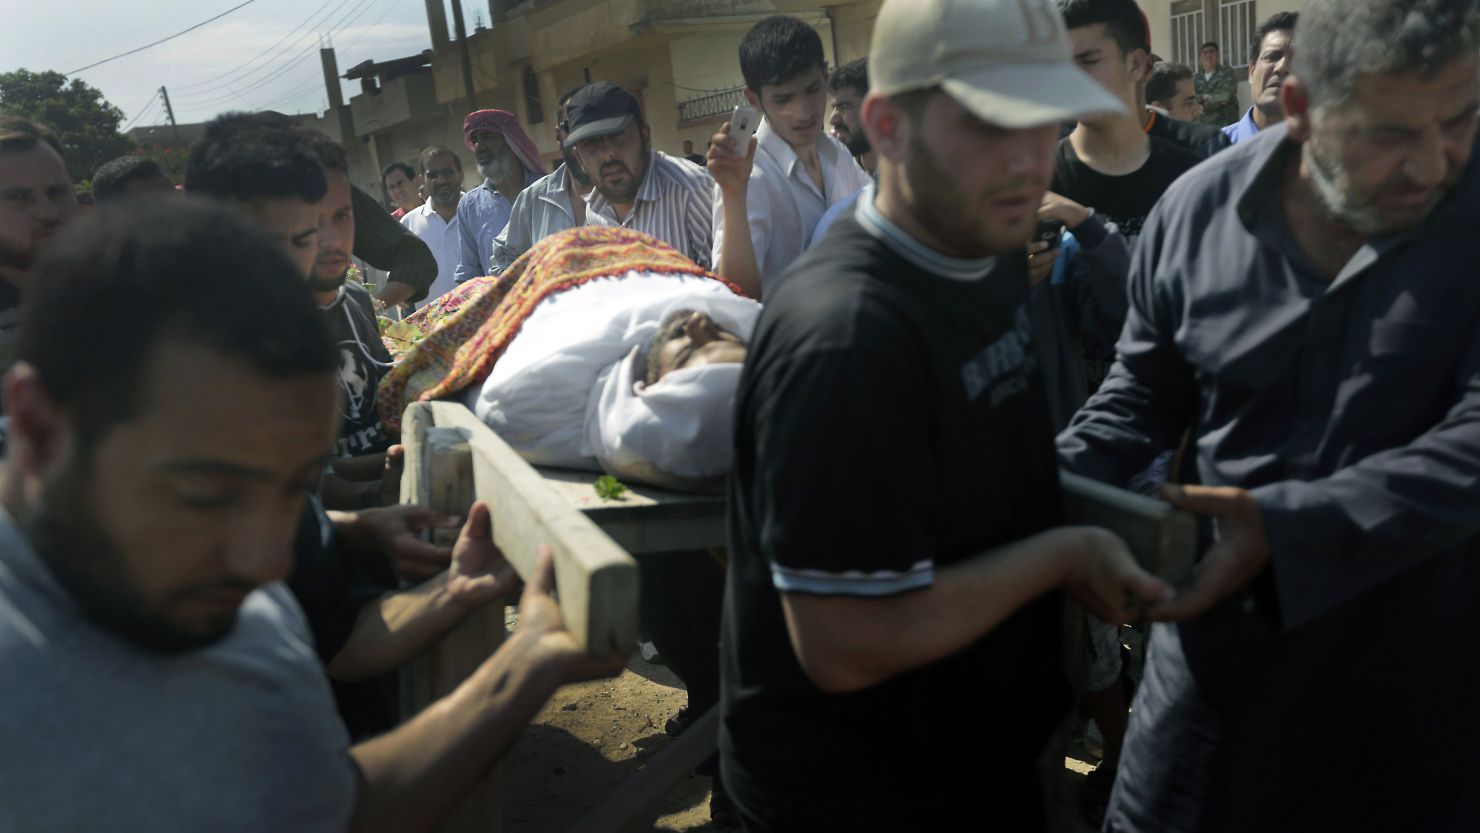 Syrian mourners carry the body of a victim of the previous day's shelling on the rebel stronghold of Qusayr on Saturday.